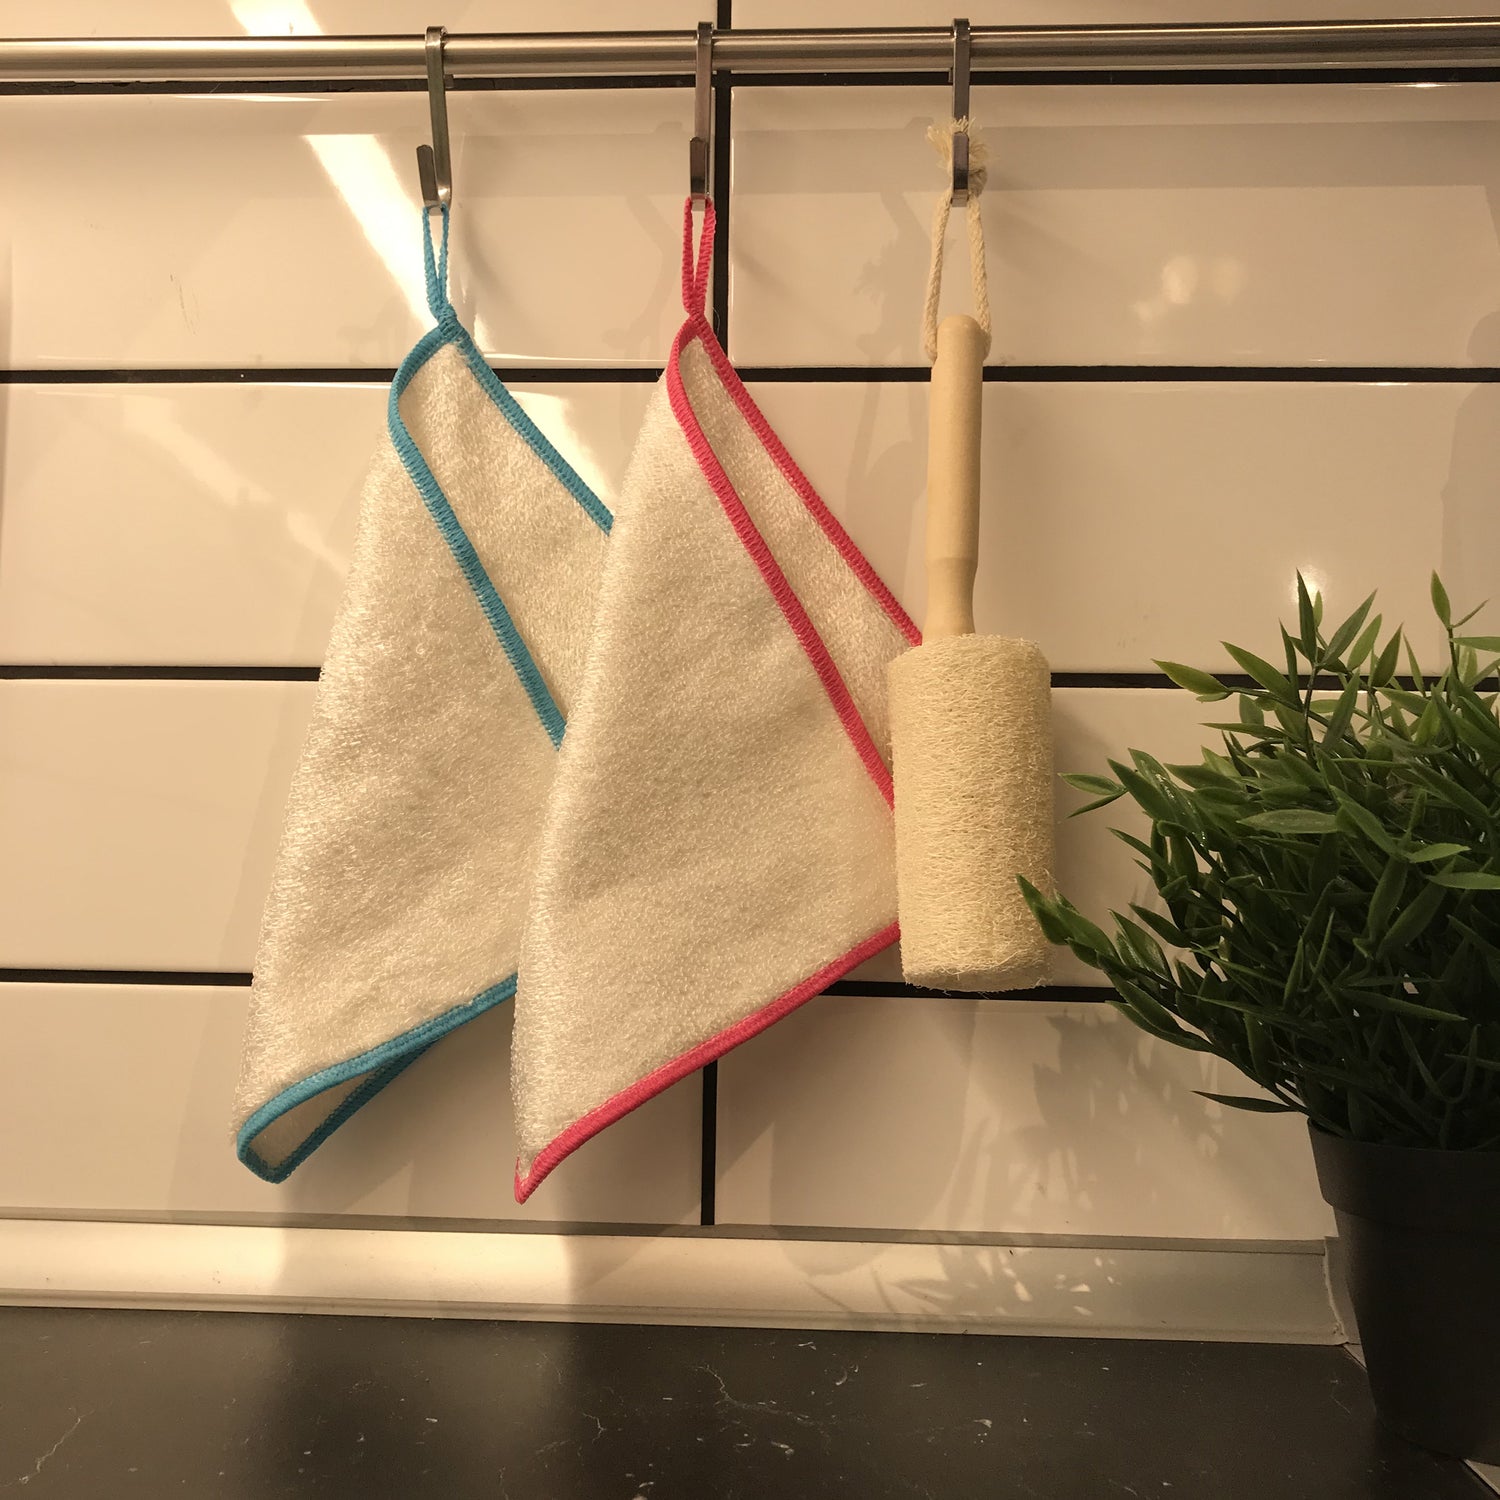 Image of reusable dishcloths - Loofah bottle brush with handle hanged on a wall in kitchen